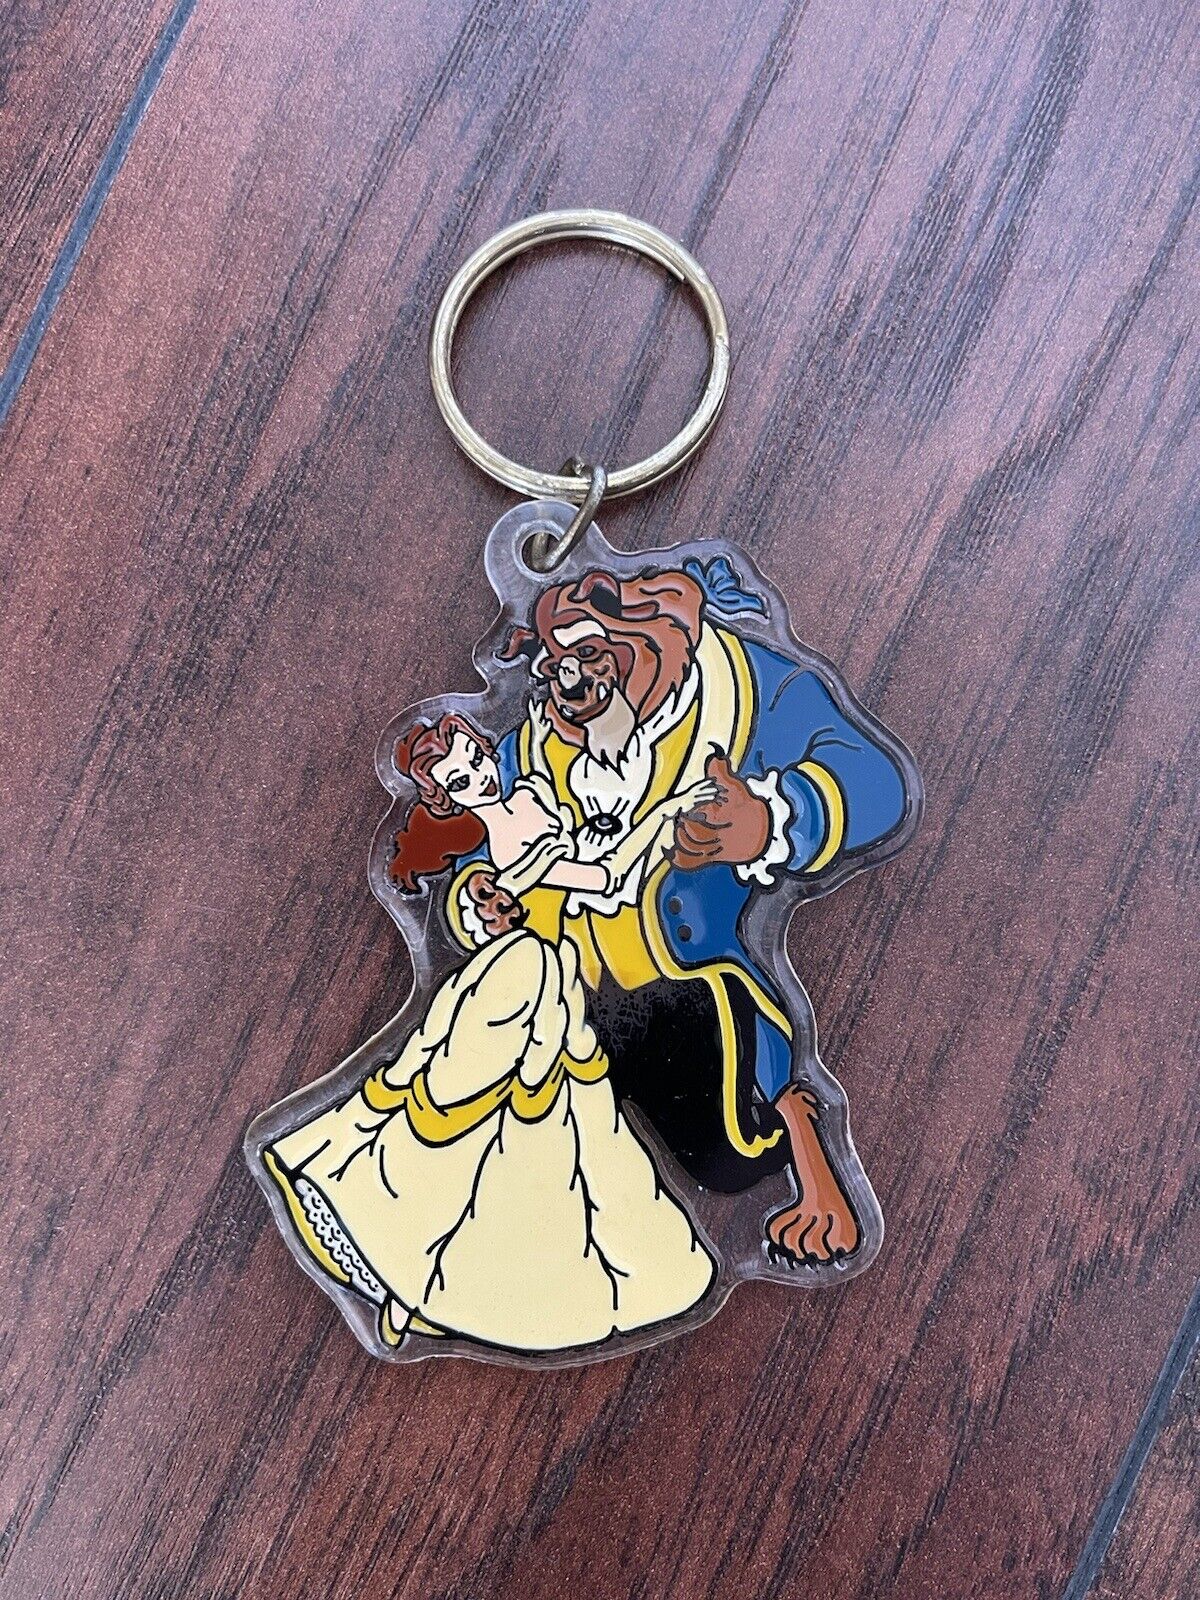 Rare Vintage Beauty & The Beast Keychain - Disney Brabo Group - Made In St Lucia